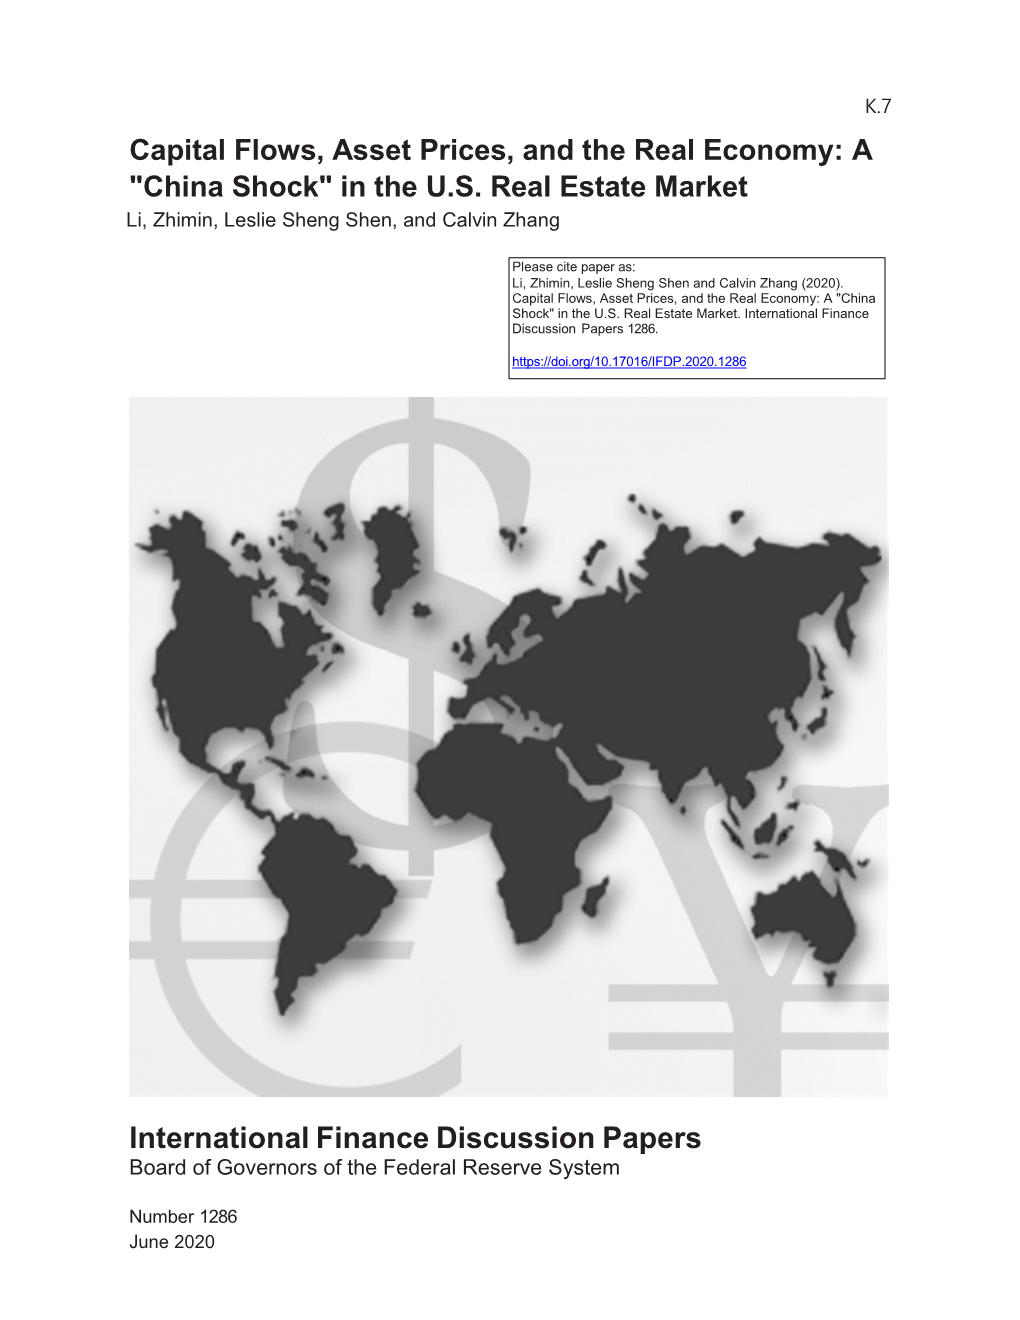 Capital Flows, Asset Prices, and the Real Economy: a "China Shock" in the U.S